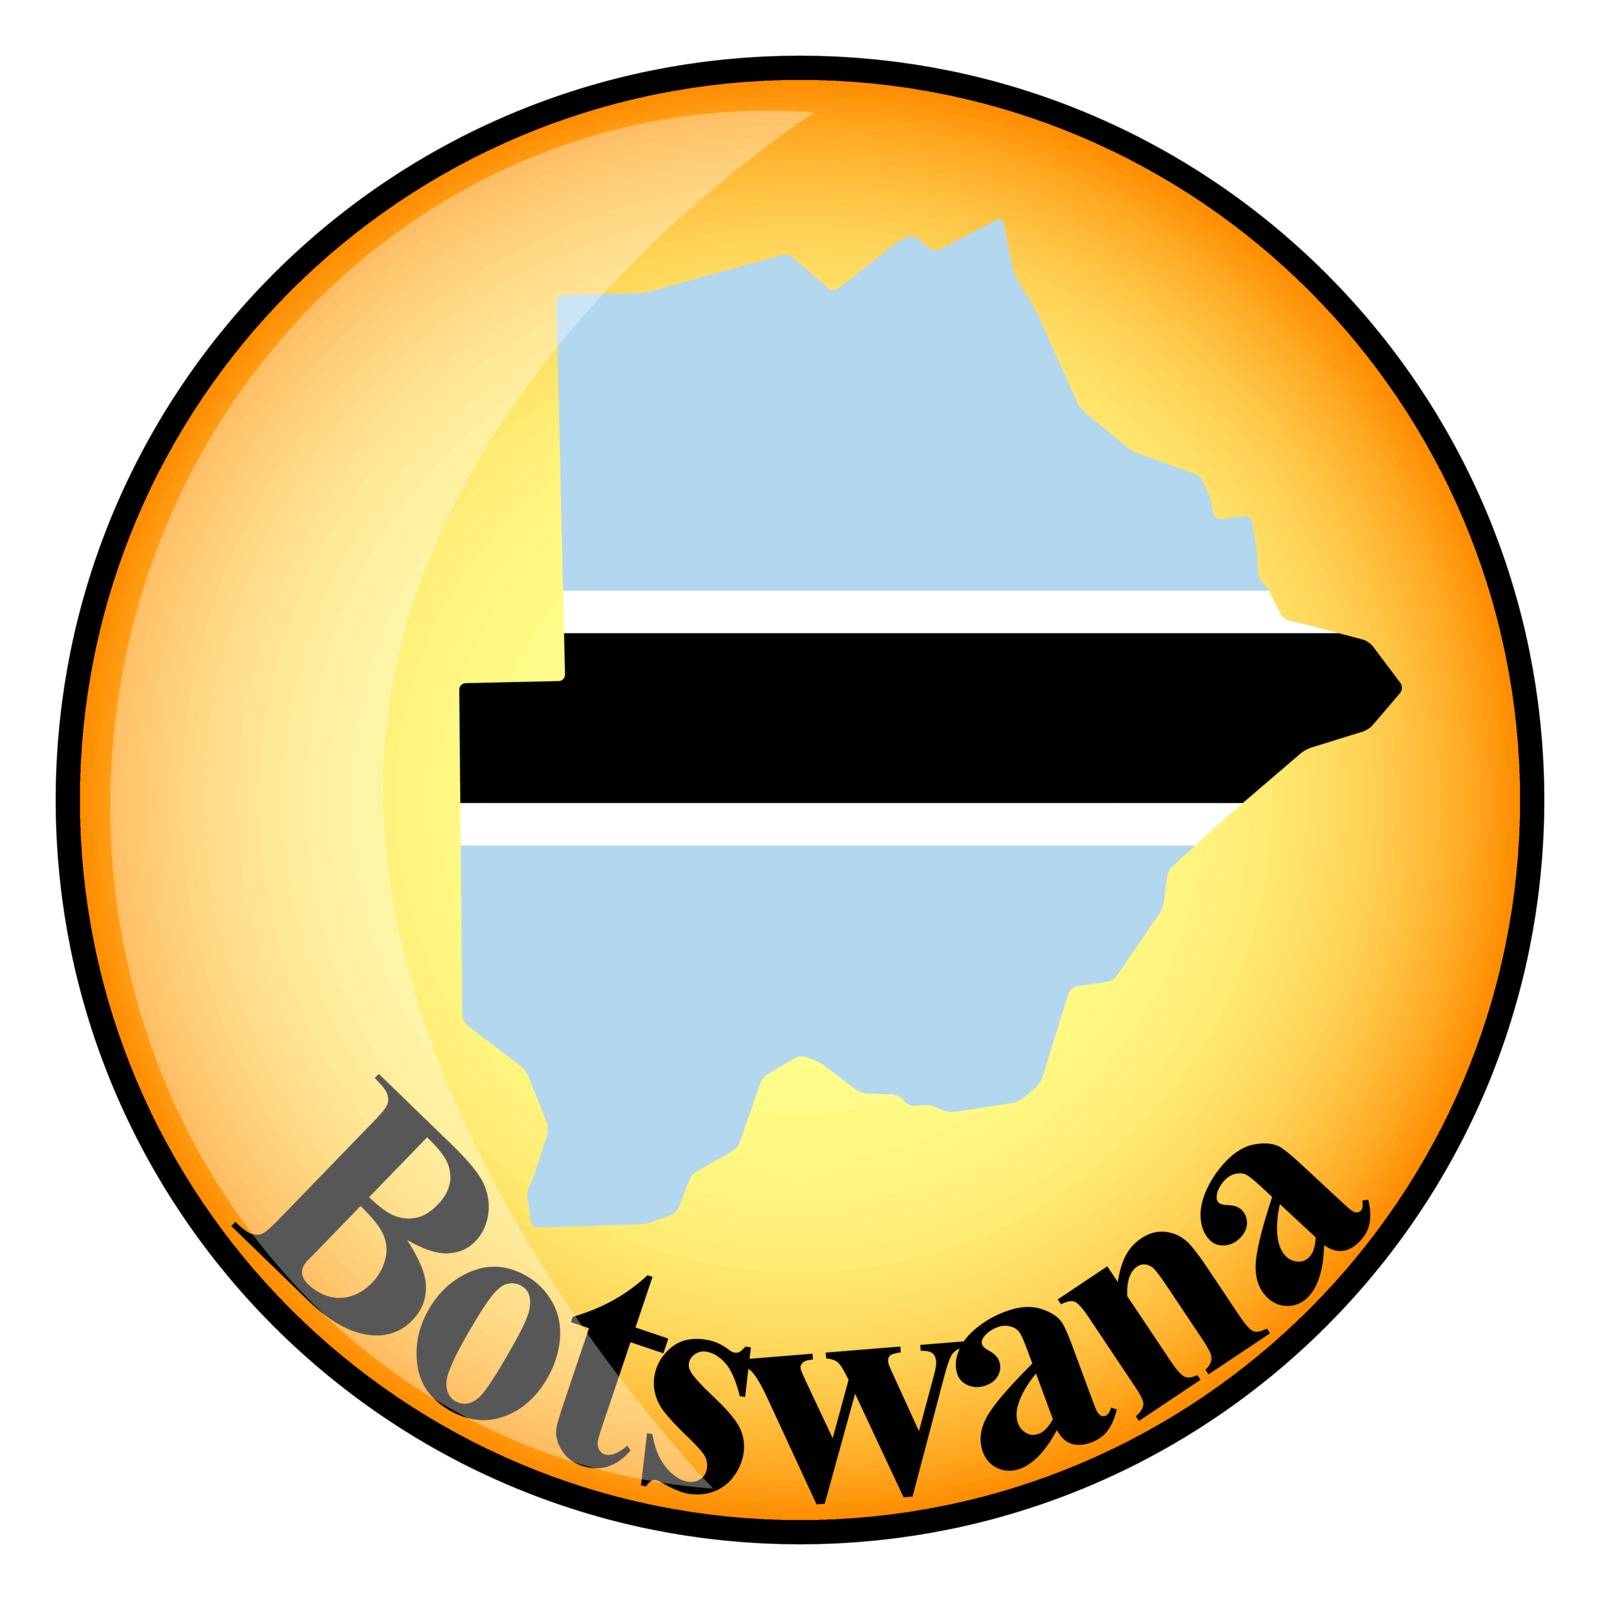 orange button with the image maps of button Botswana in the form of national flag